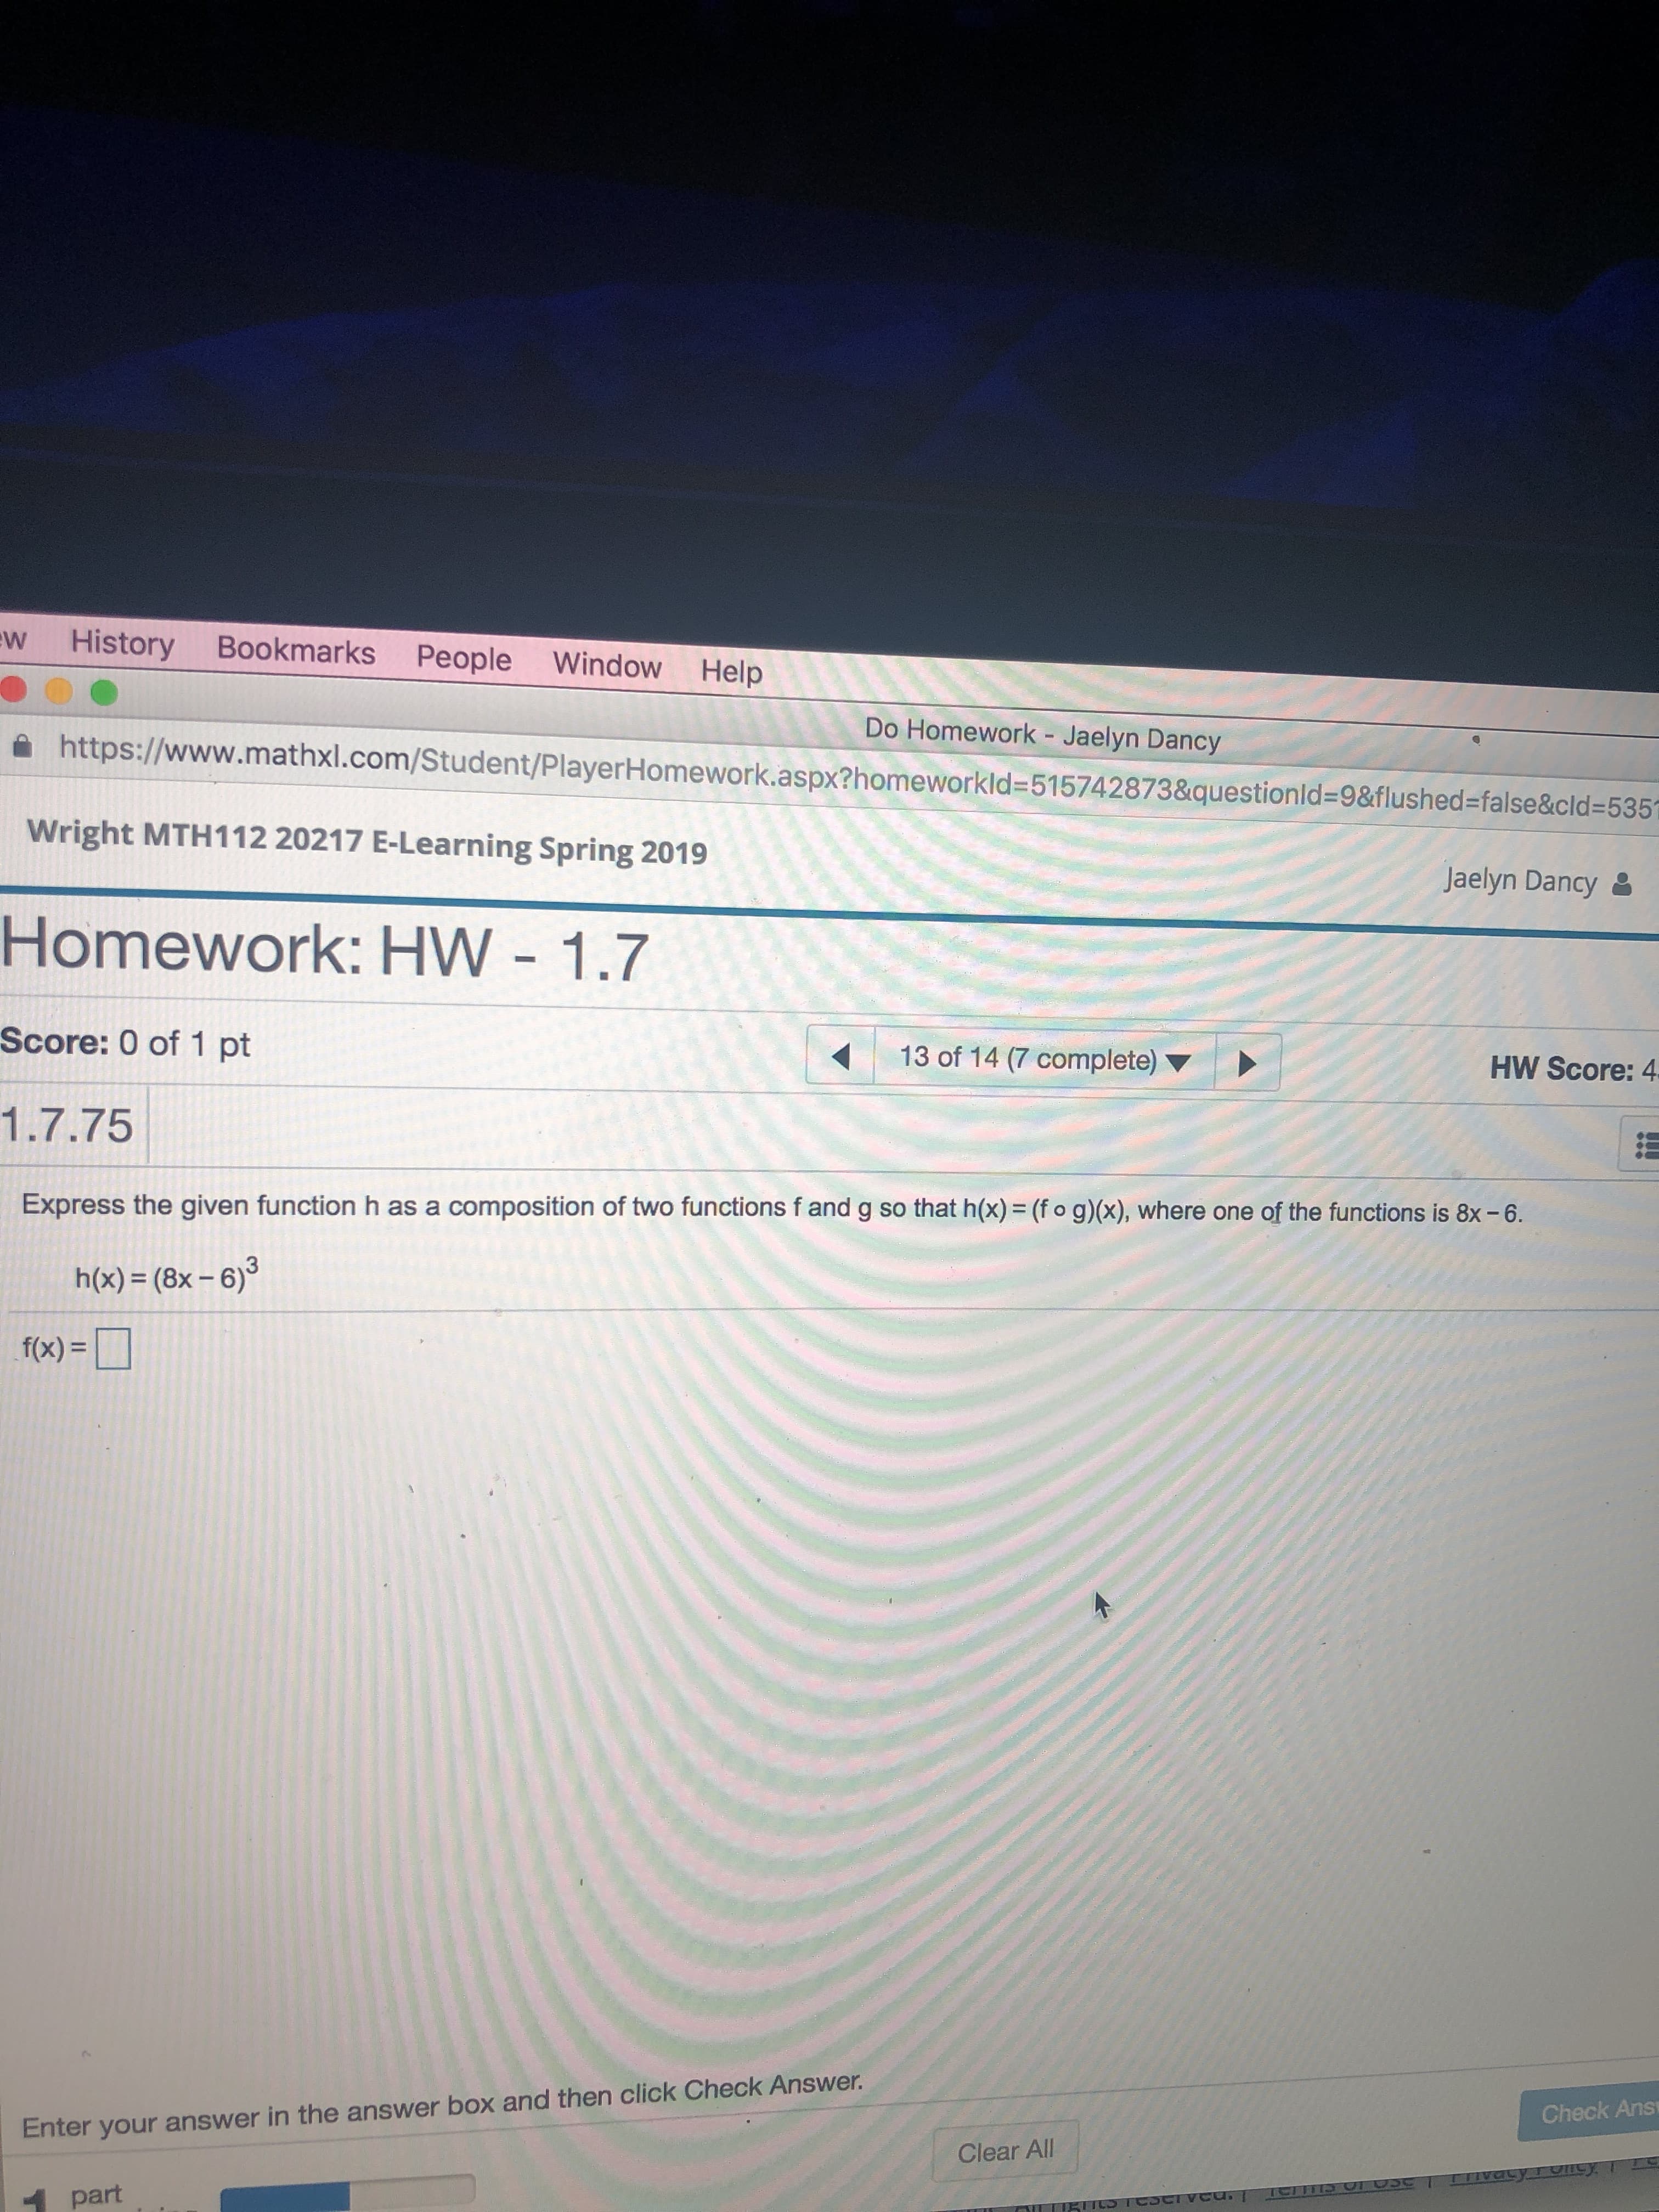 w History Bookmarks People Window Help
Do Homework - Jaelyn Dancy
ด https://www.mathxl.com/Student/PlayerHomework.aspx?homeworkid-515742873&questionid-9&flushed-false&cld.535
Wright MTH112 20217 E-Learning Spring 2019
Homework: HW - 1.7
Score: 0 of 1 pt
1.7.75
Jaelyn Dancy
13 of 147 complete)
HW Score: 4
Express the given function h as a composition of two functions f and g so that h(x) = (fog)(x), where one of the functions is 8x-6
h(x) (8x-6)3
fo)-
Check Ans
Enter your answer in the answer box and then click Check Answer.
Clear All
part
